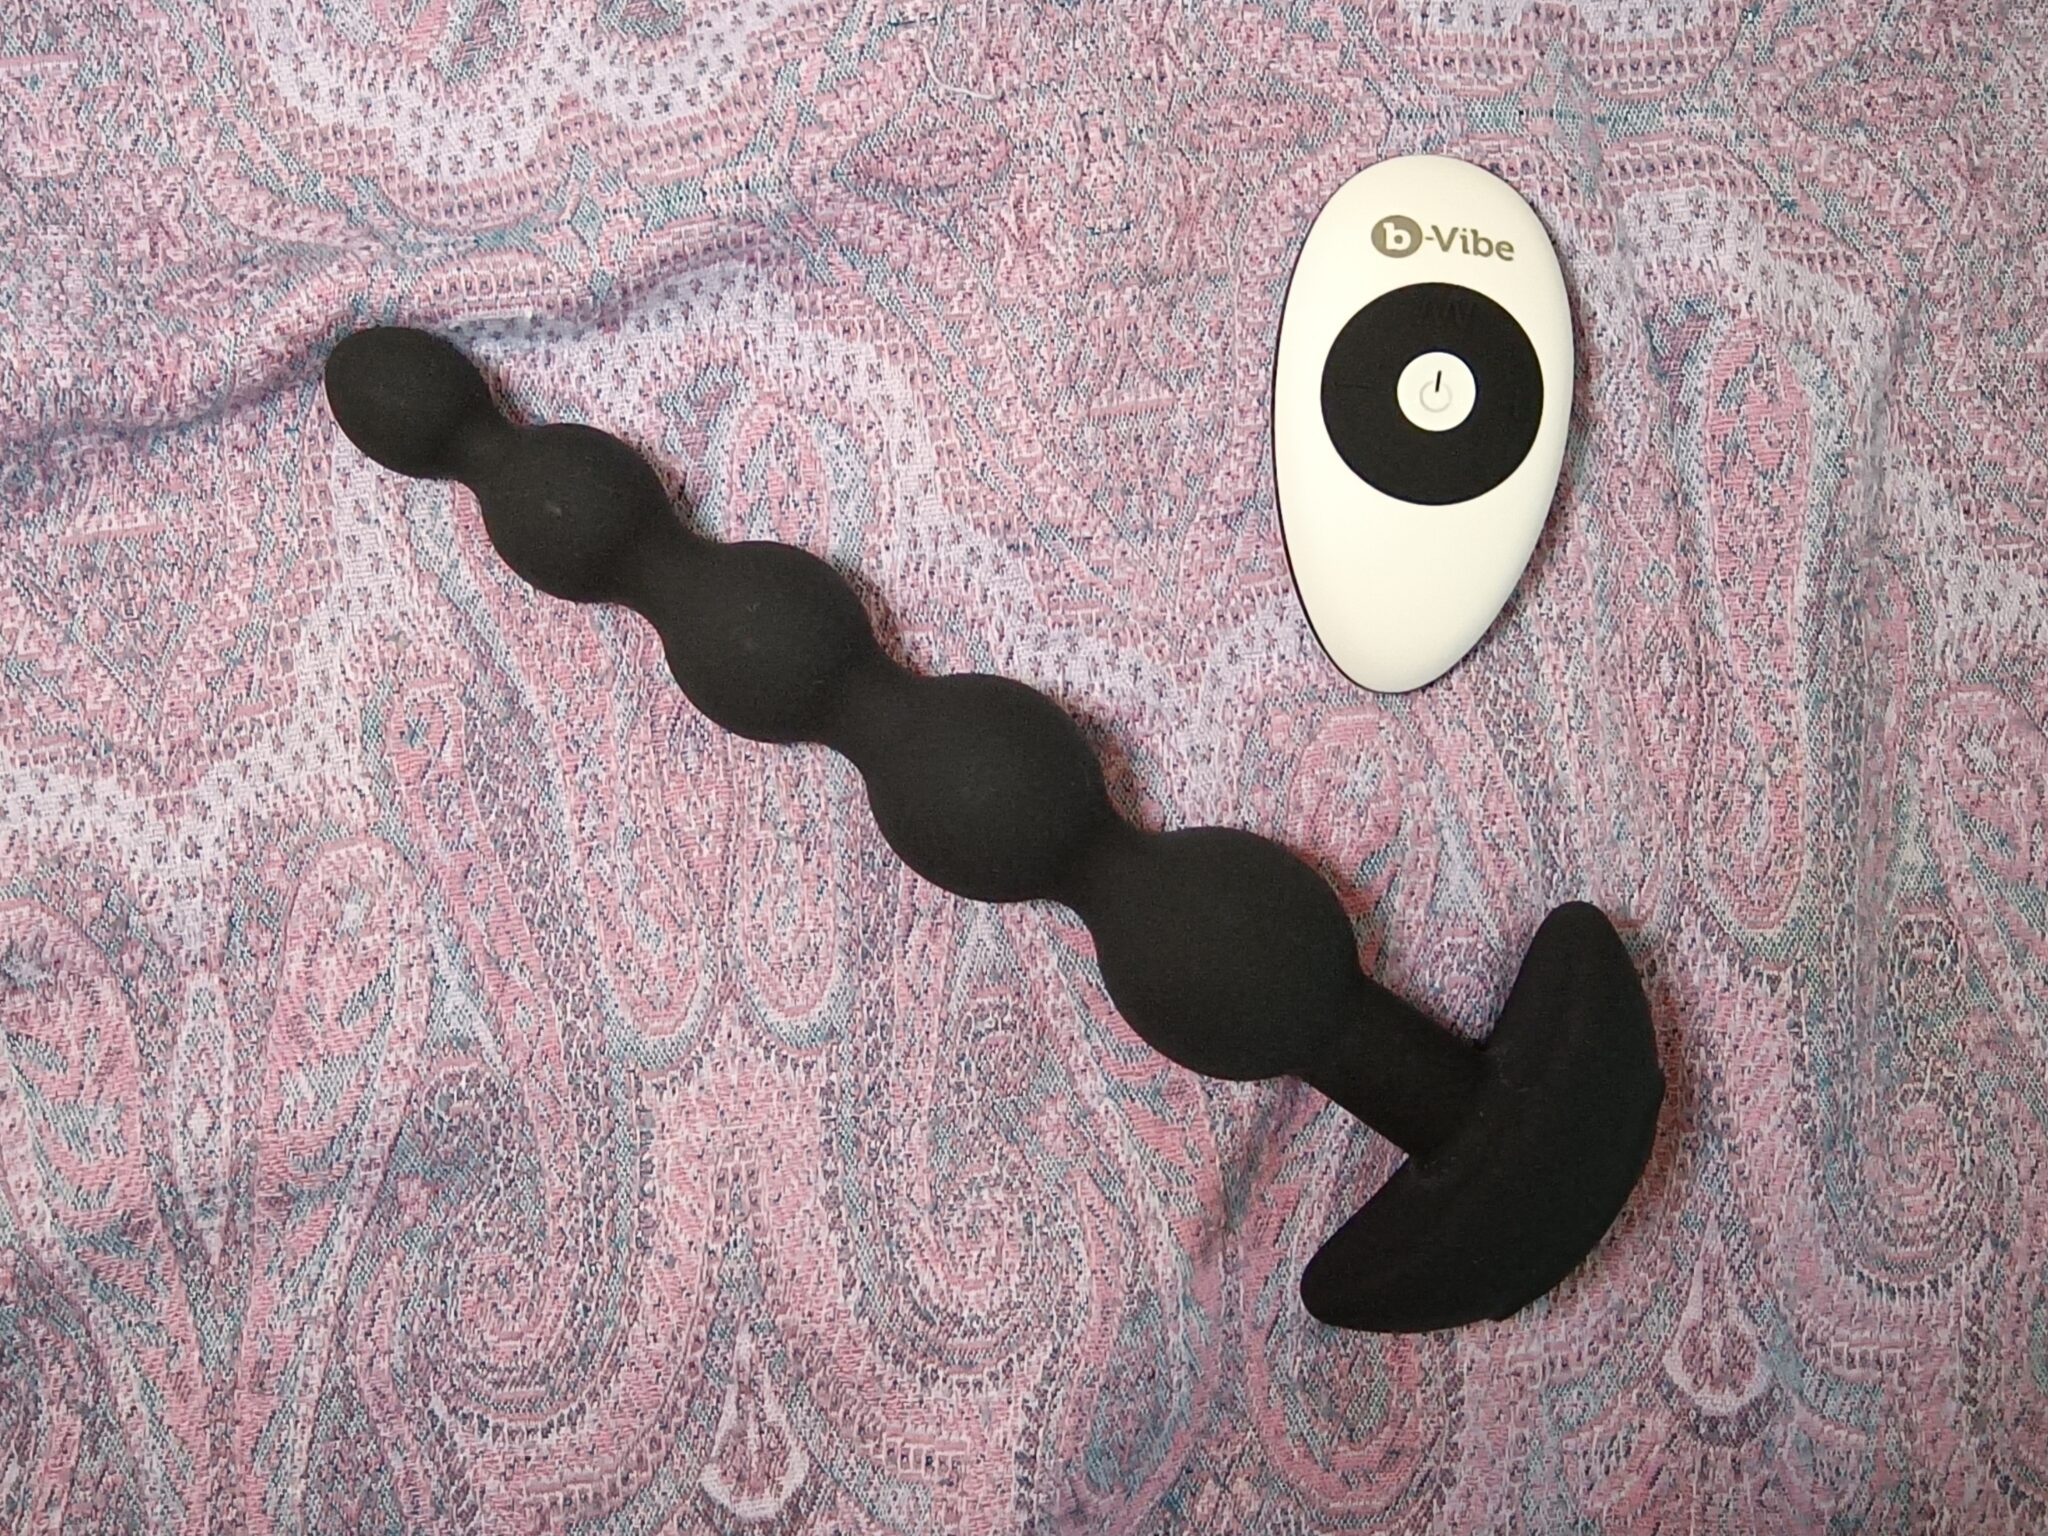 b-Vibe Cinco Remote Controlled Vibrating Anal Beads. Slide 3